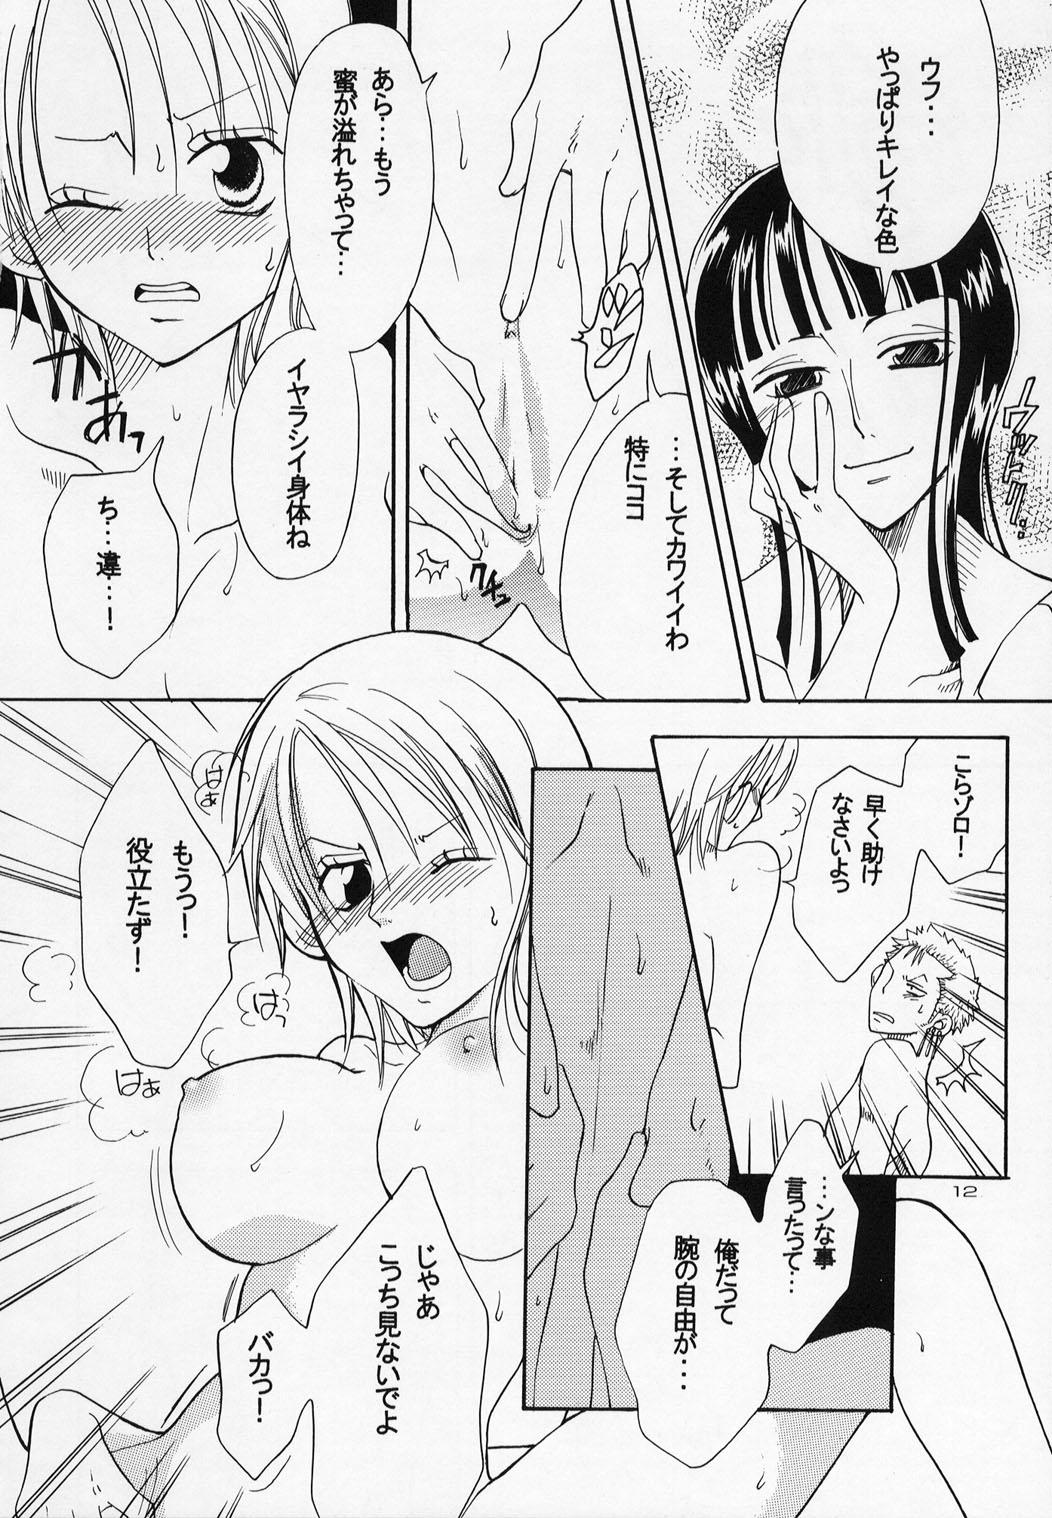 Free Amature Porn Shiawase Punch! 4 - One piece Romantic - Page 12